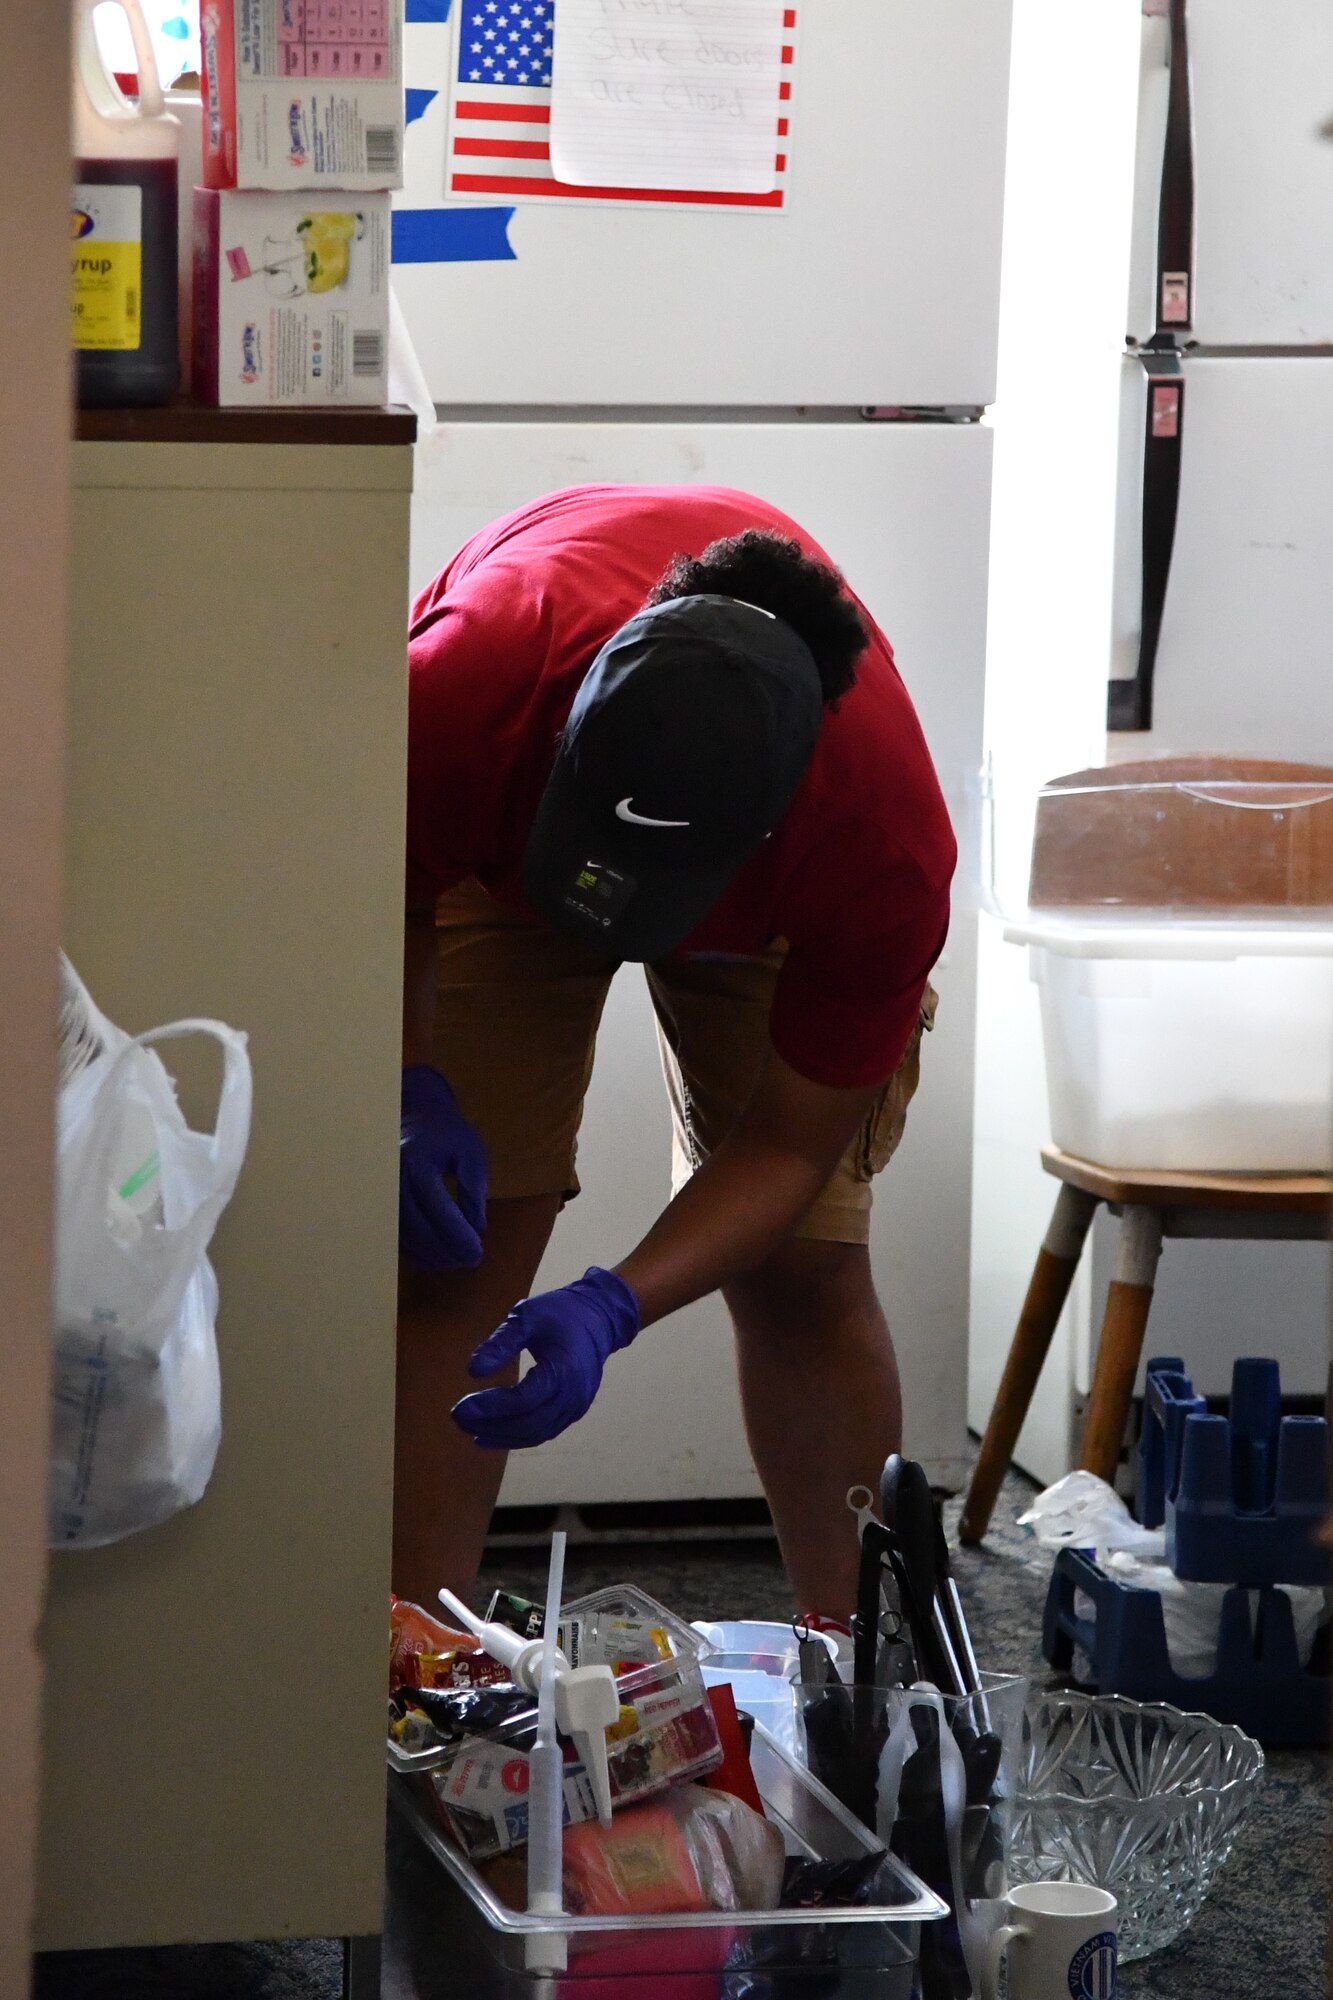 A U.S. Air Force volunteer with the 36th Intelligence Squadron cleans and organizes during the squadron’s volunteer event at the Hampton Veterans Affairs Medical Center in Hampton, Virginia, May 3, 2019. Volunteers spent time giving back to the community and former military members.  (U.S. Air Force photo by Robert Mehal)